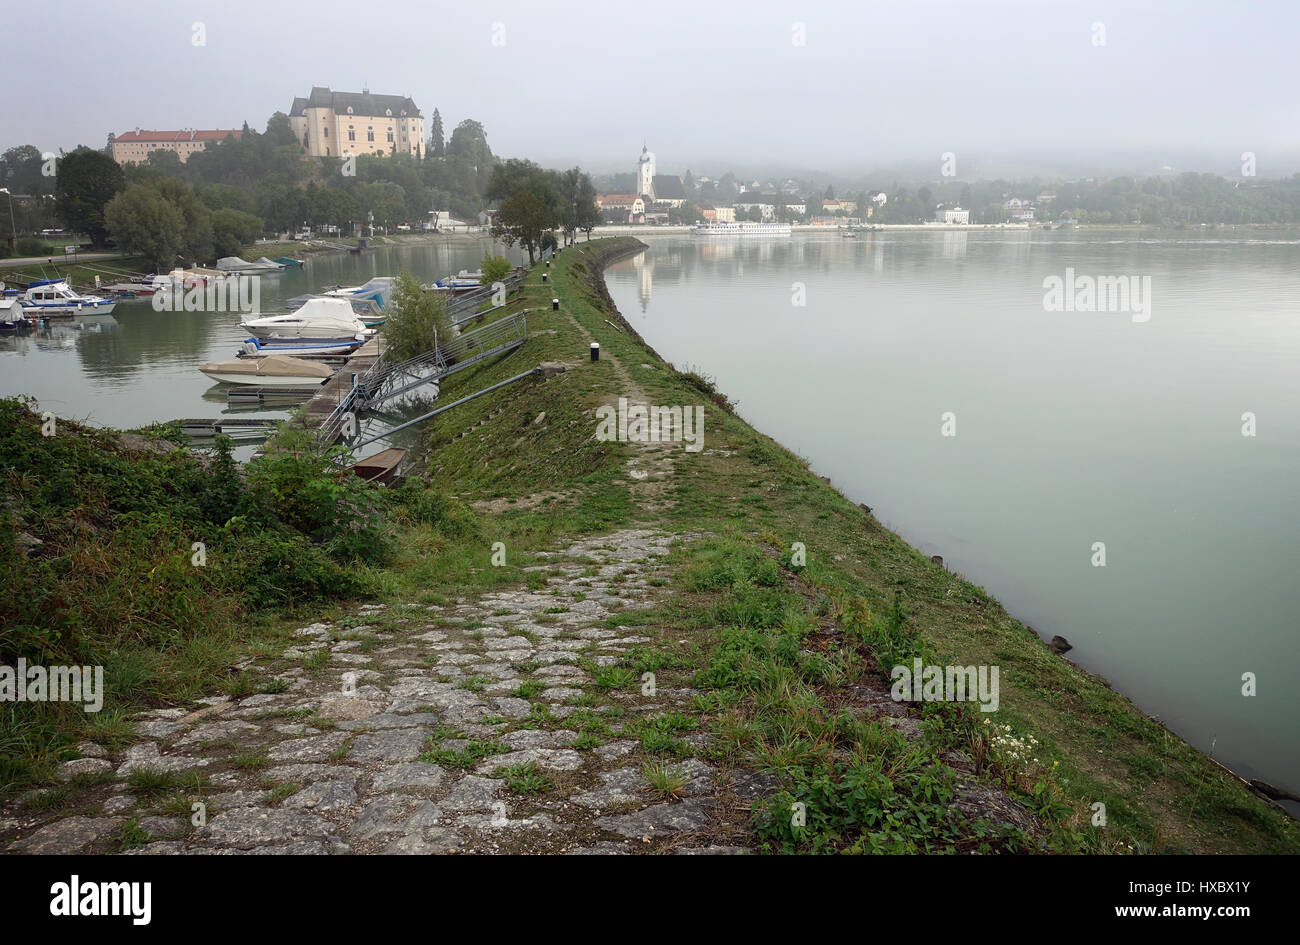 The town of Grein in Austria on a foggy morning. Stock Photo